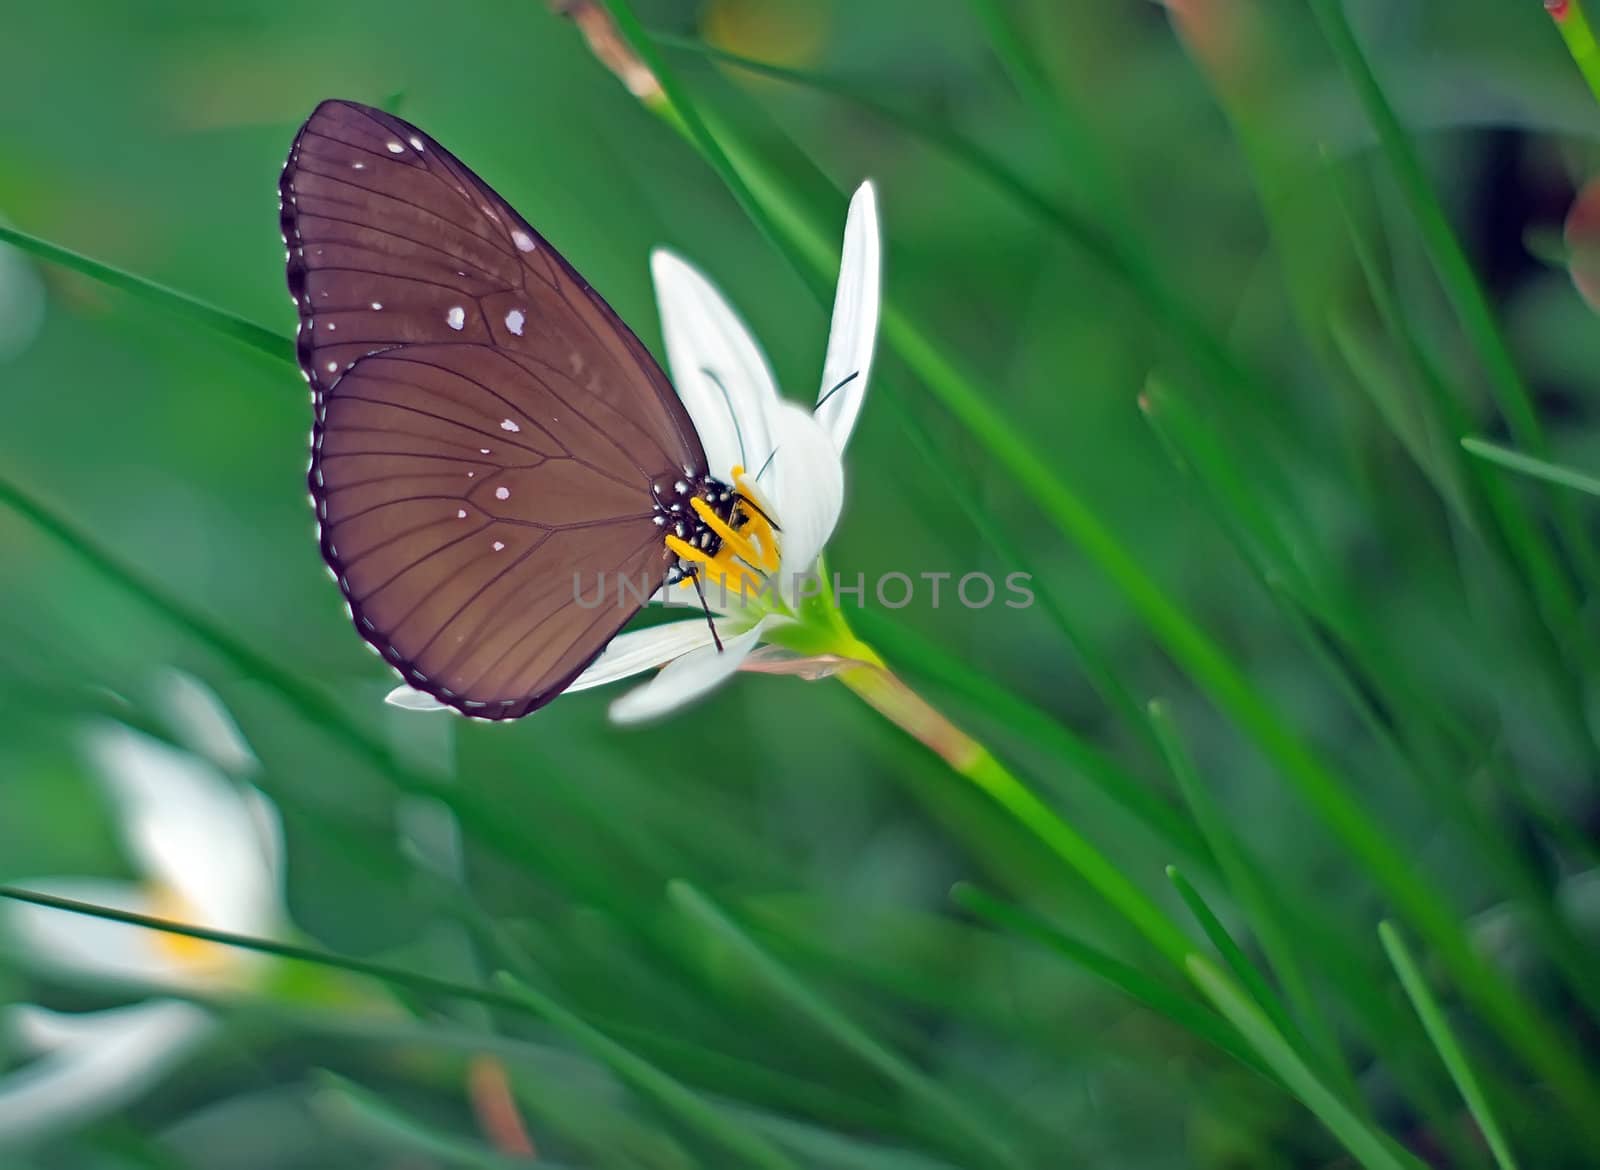 Leek orchid and Butterfly by xfdly5